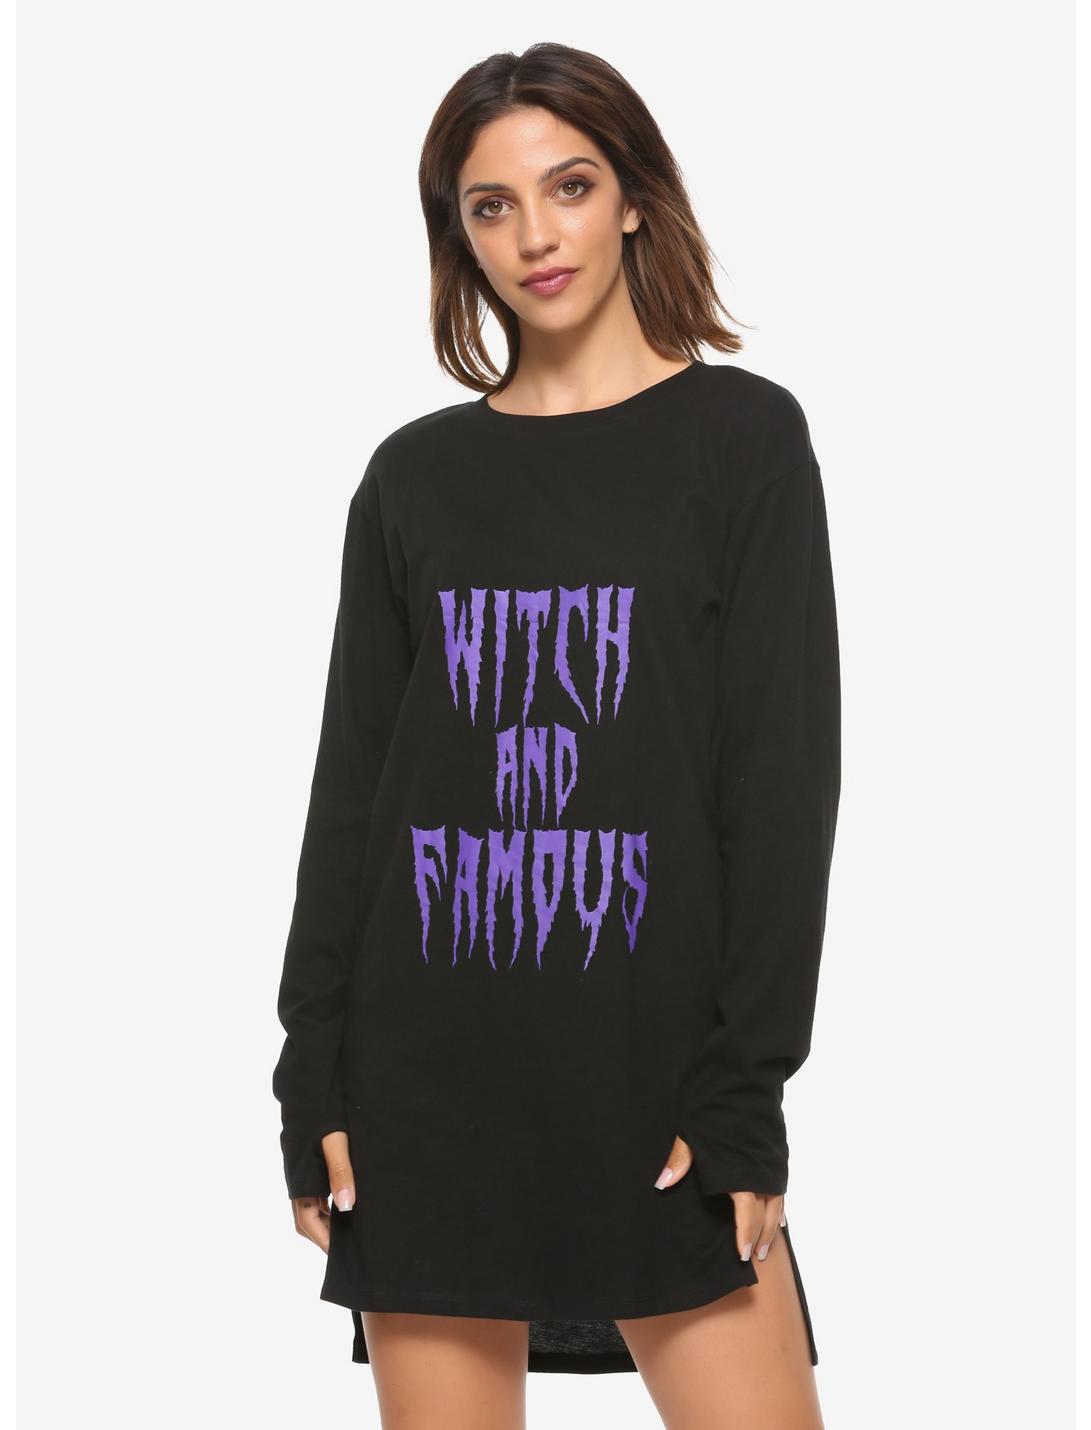 Witch And Famous Long-Sleeve T-Shirt Dress, PURPLE, hi-res